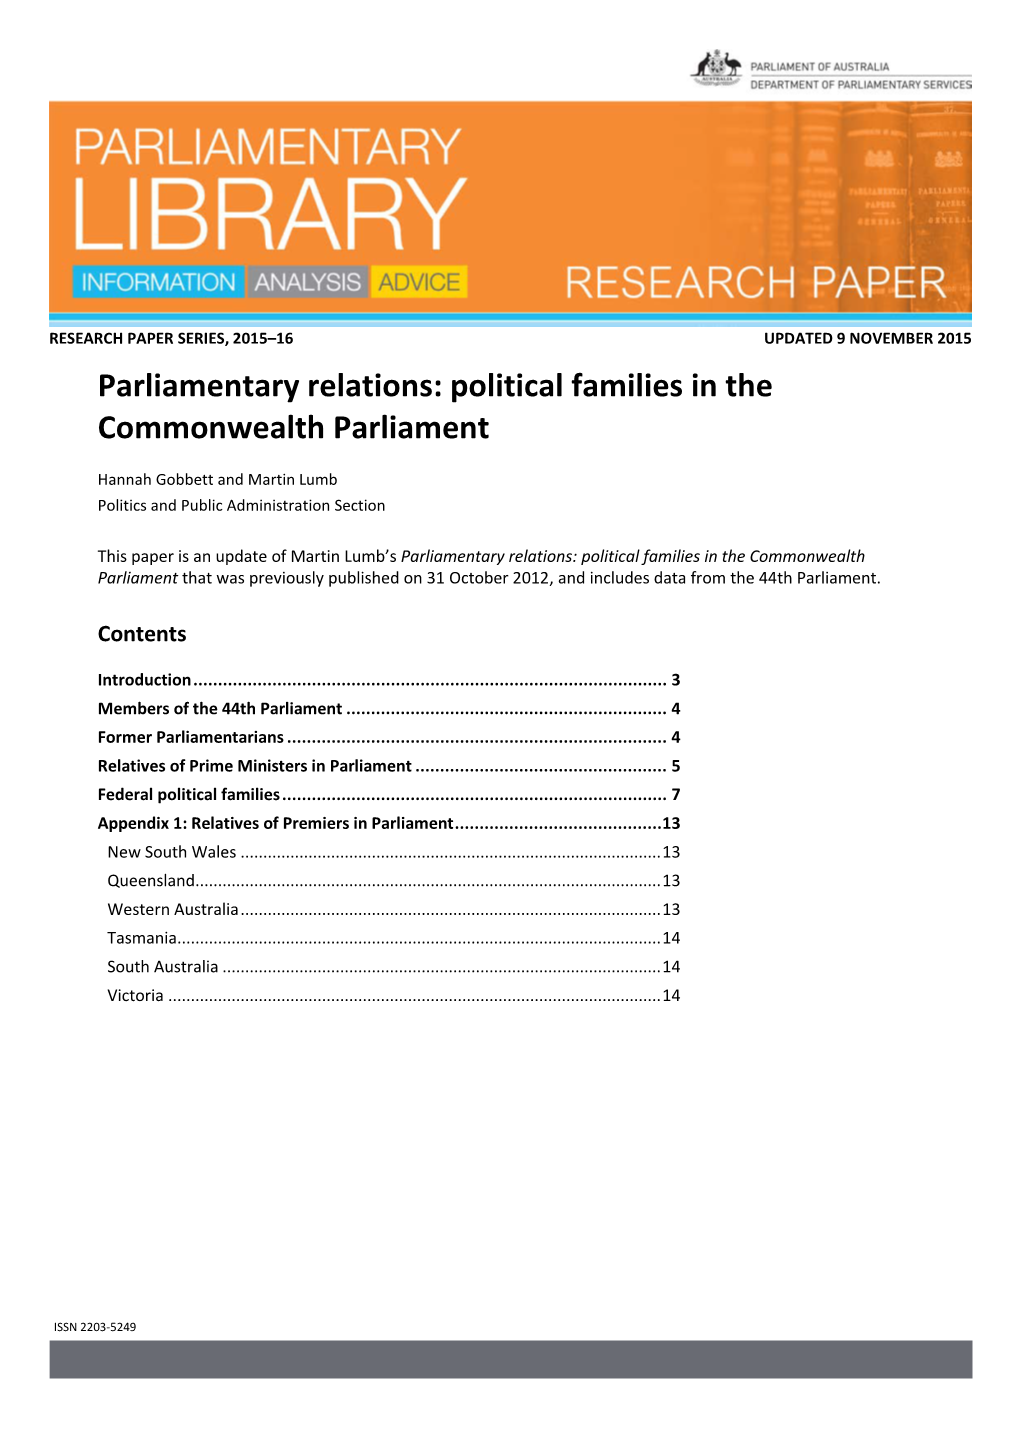 Political Families in the Commonwealth Parliament